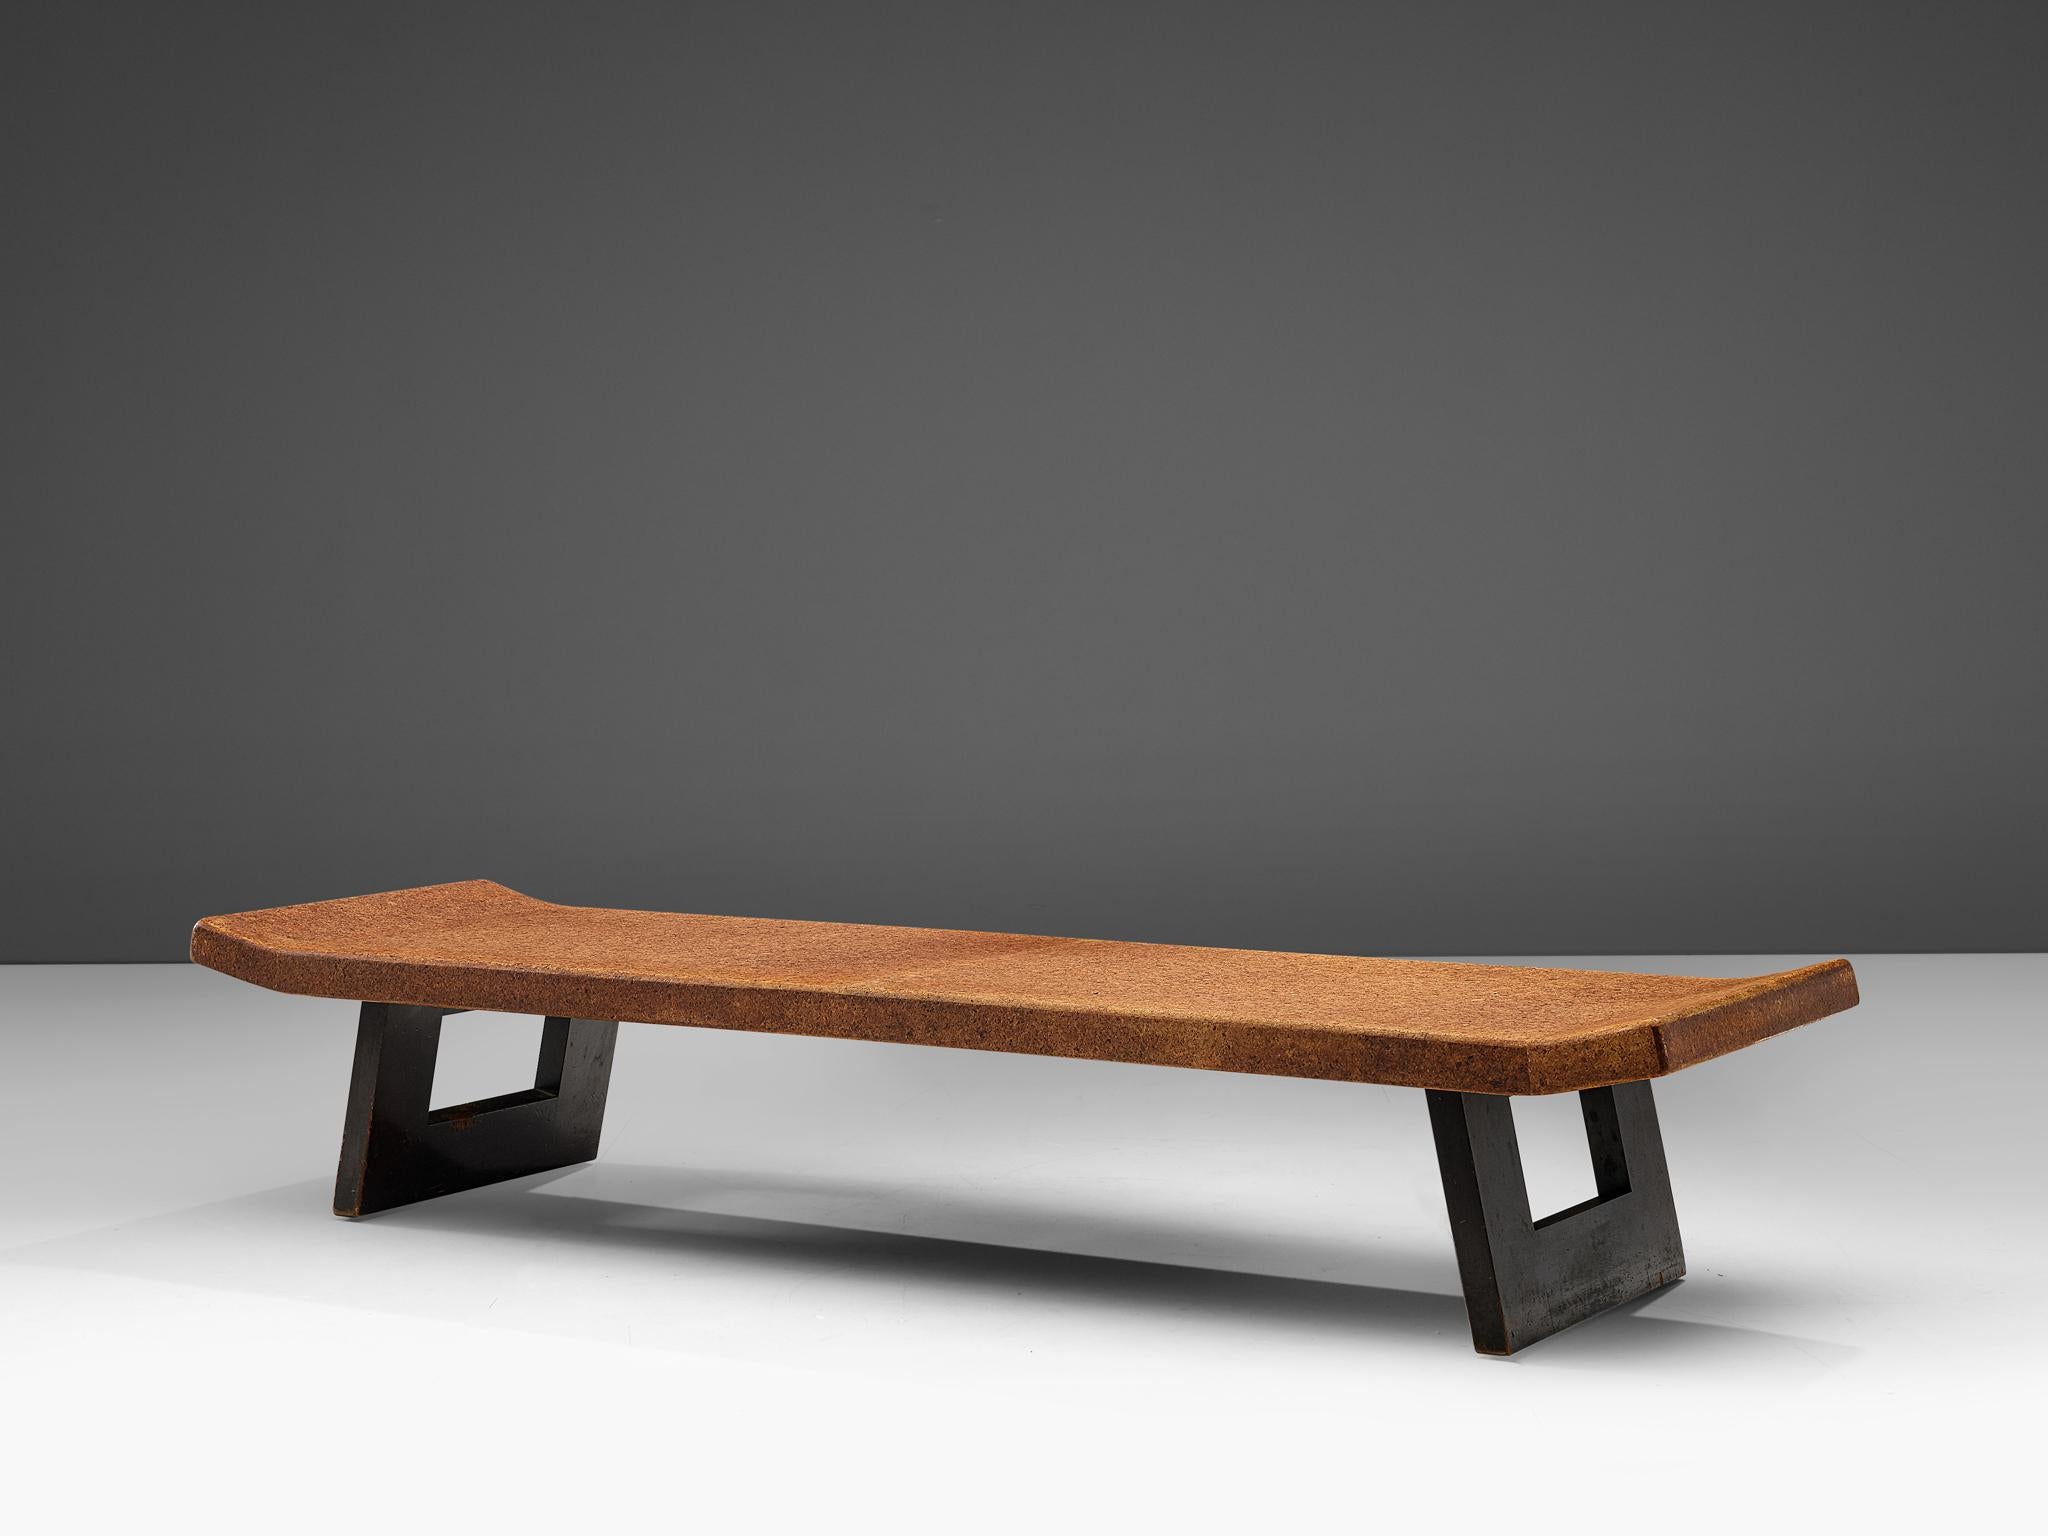 Paul Frankl for Johnson Furniture Company, coffee table, cork and mahogany, United States, circa 1950.

A coffee table inspired by the long, low Asian furniture style, executed with a bleached cork tabletop and mahogany legs. In 1949 Frankl